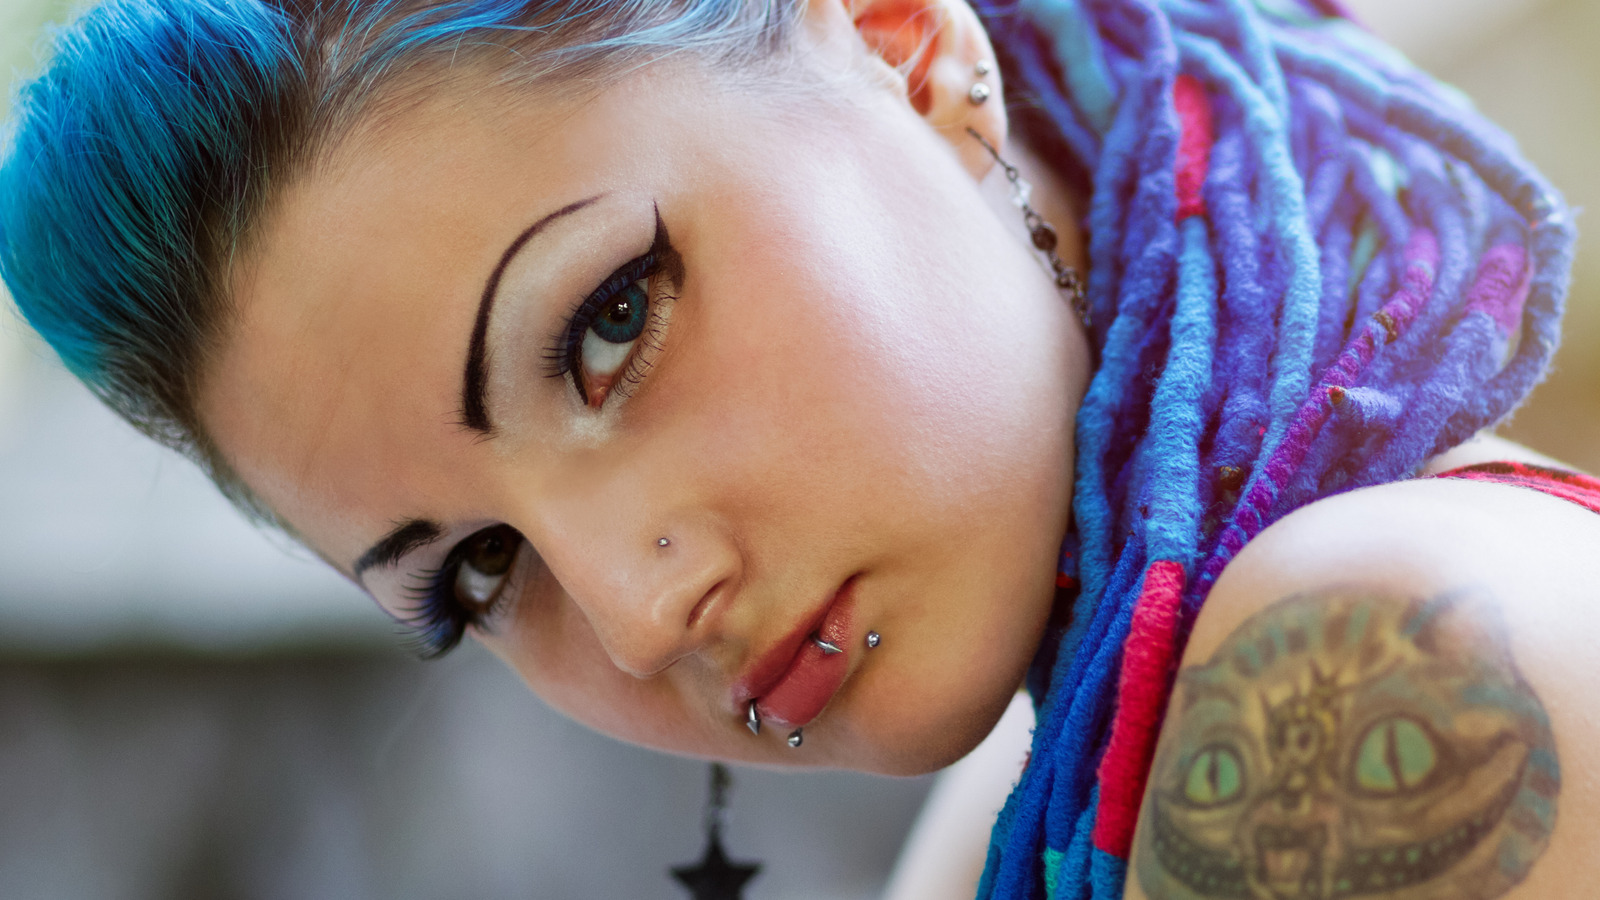 Piercing Vs Tattooing: Which One Hurts More?